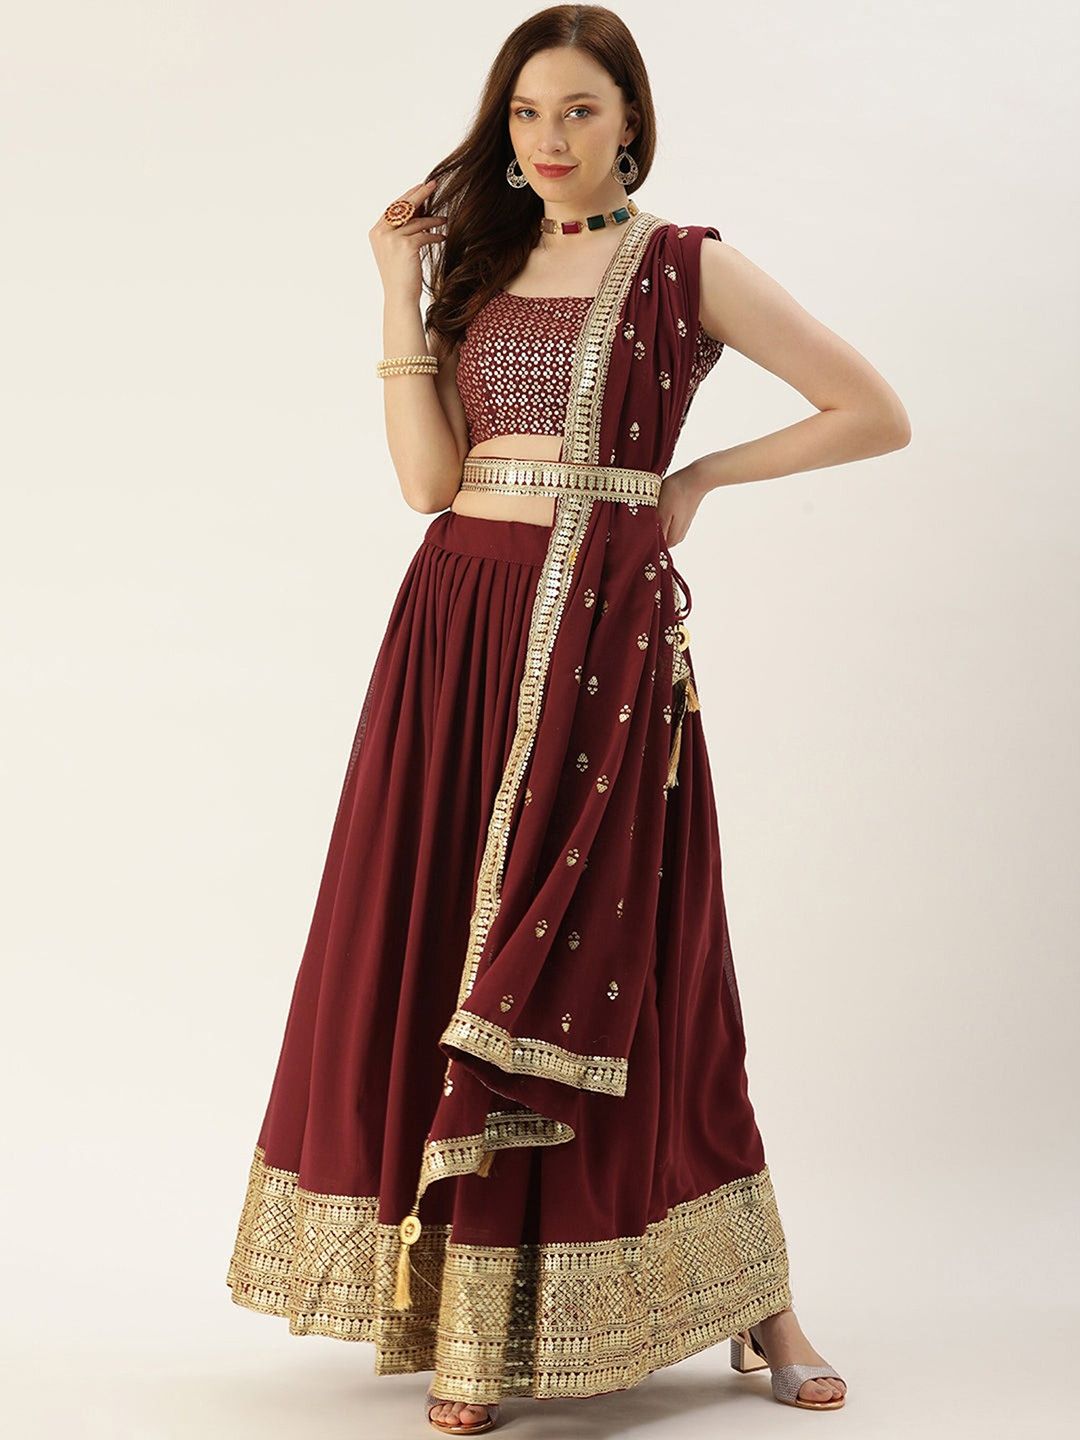 UDBHAV TEXTILE Embellished Sequinned Semi-Stitched Lehenga & Unstitched Blouse With Price in India